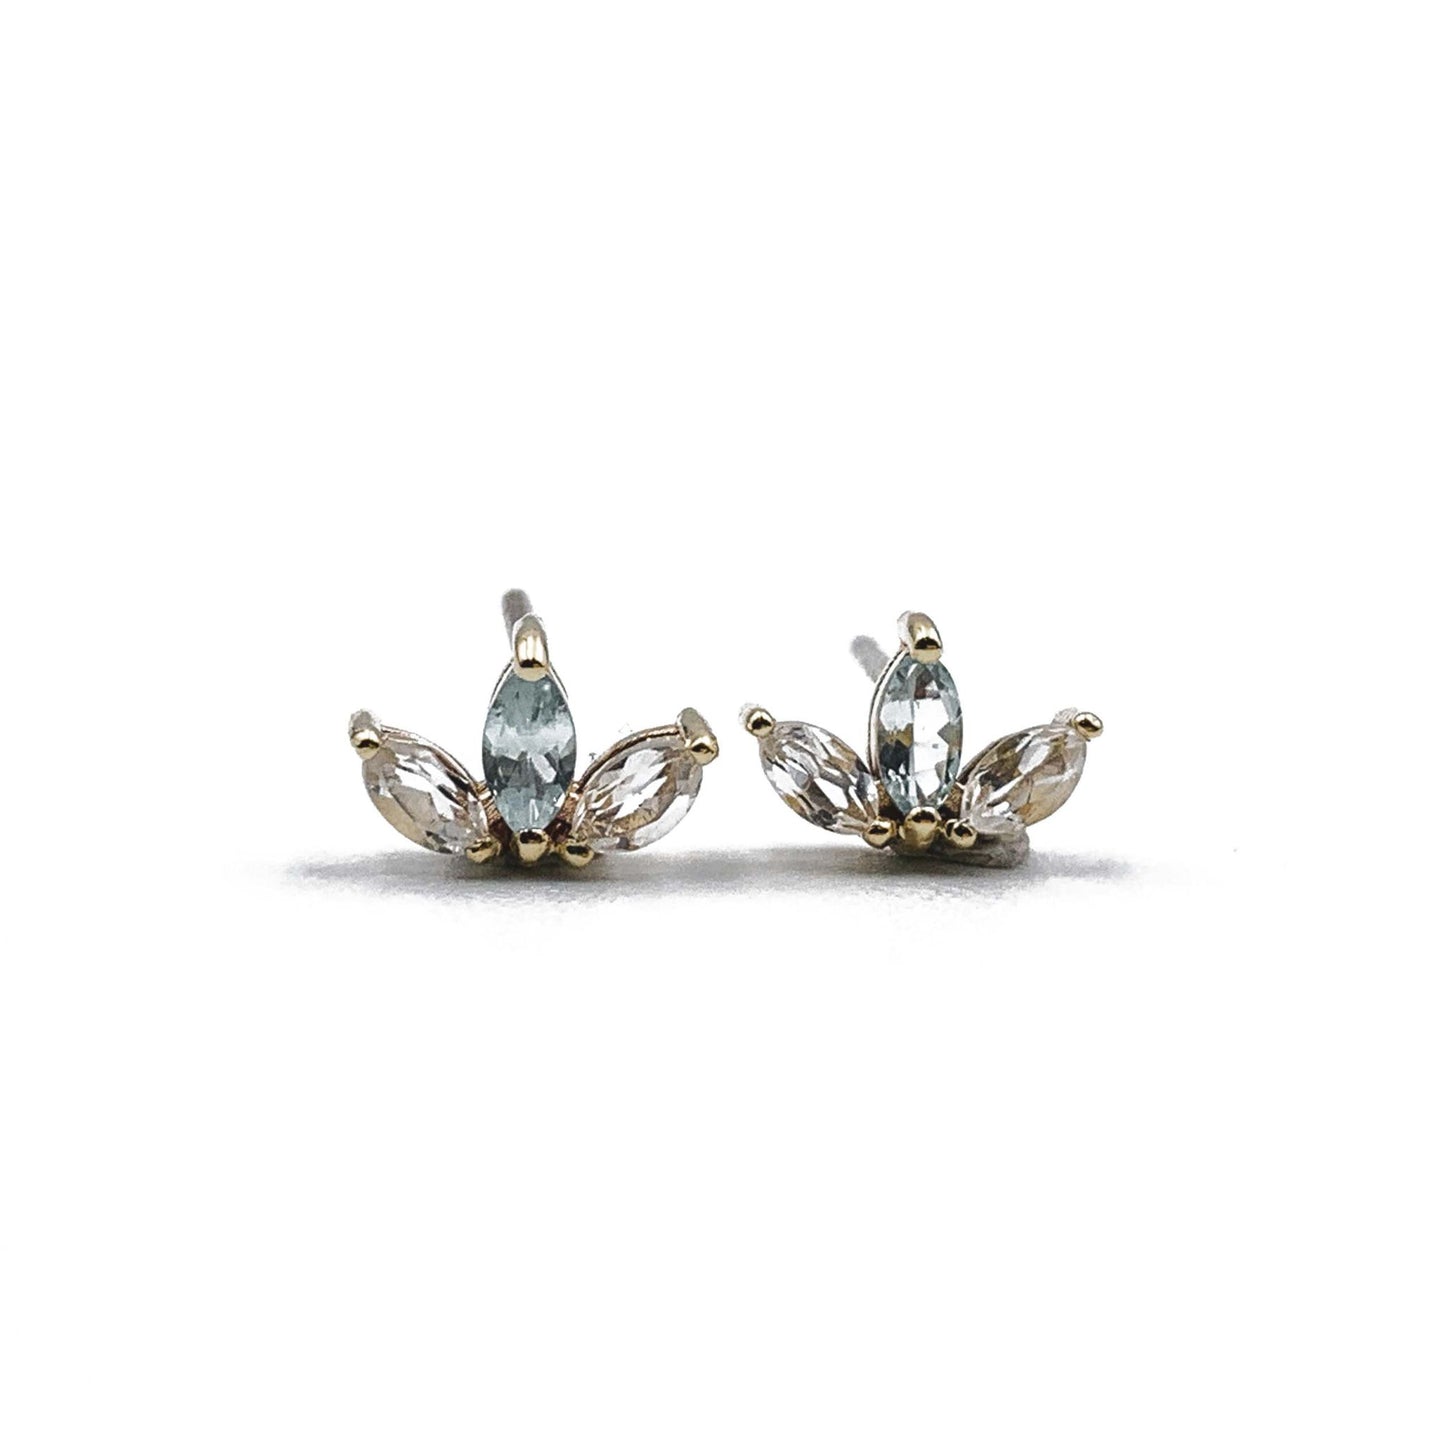 White Gold, White Topaz Gemstone Stud Earrings by Thor Collective 